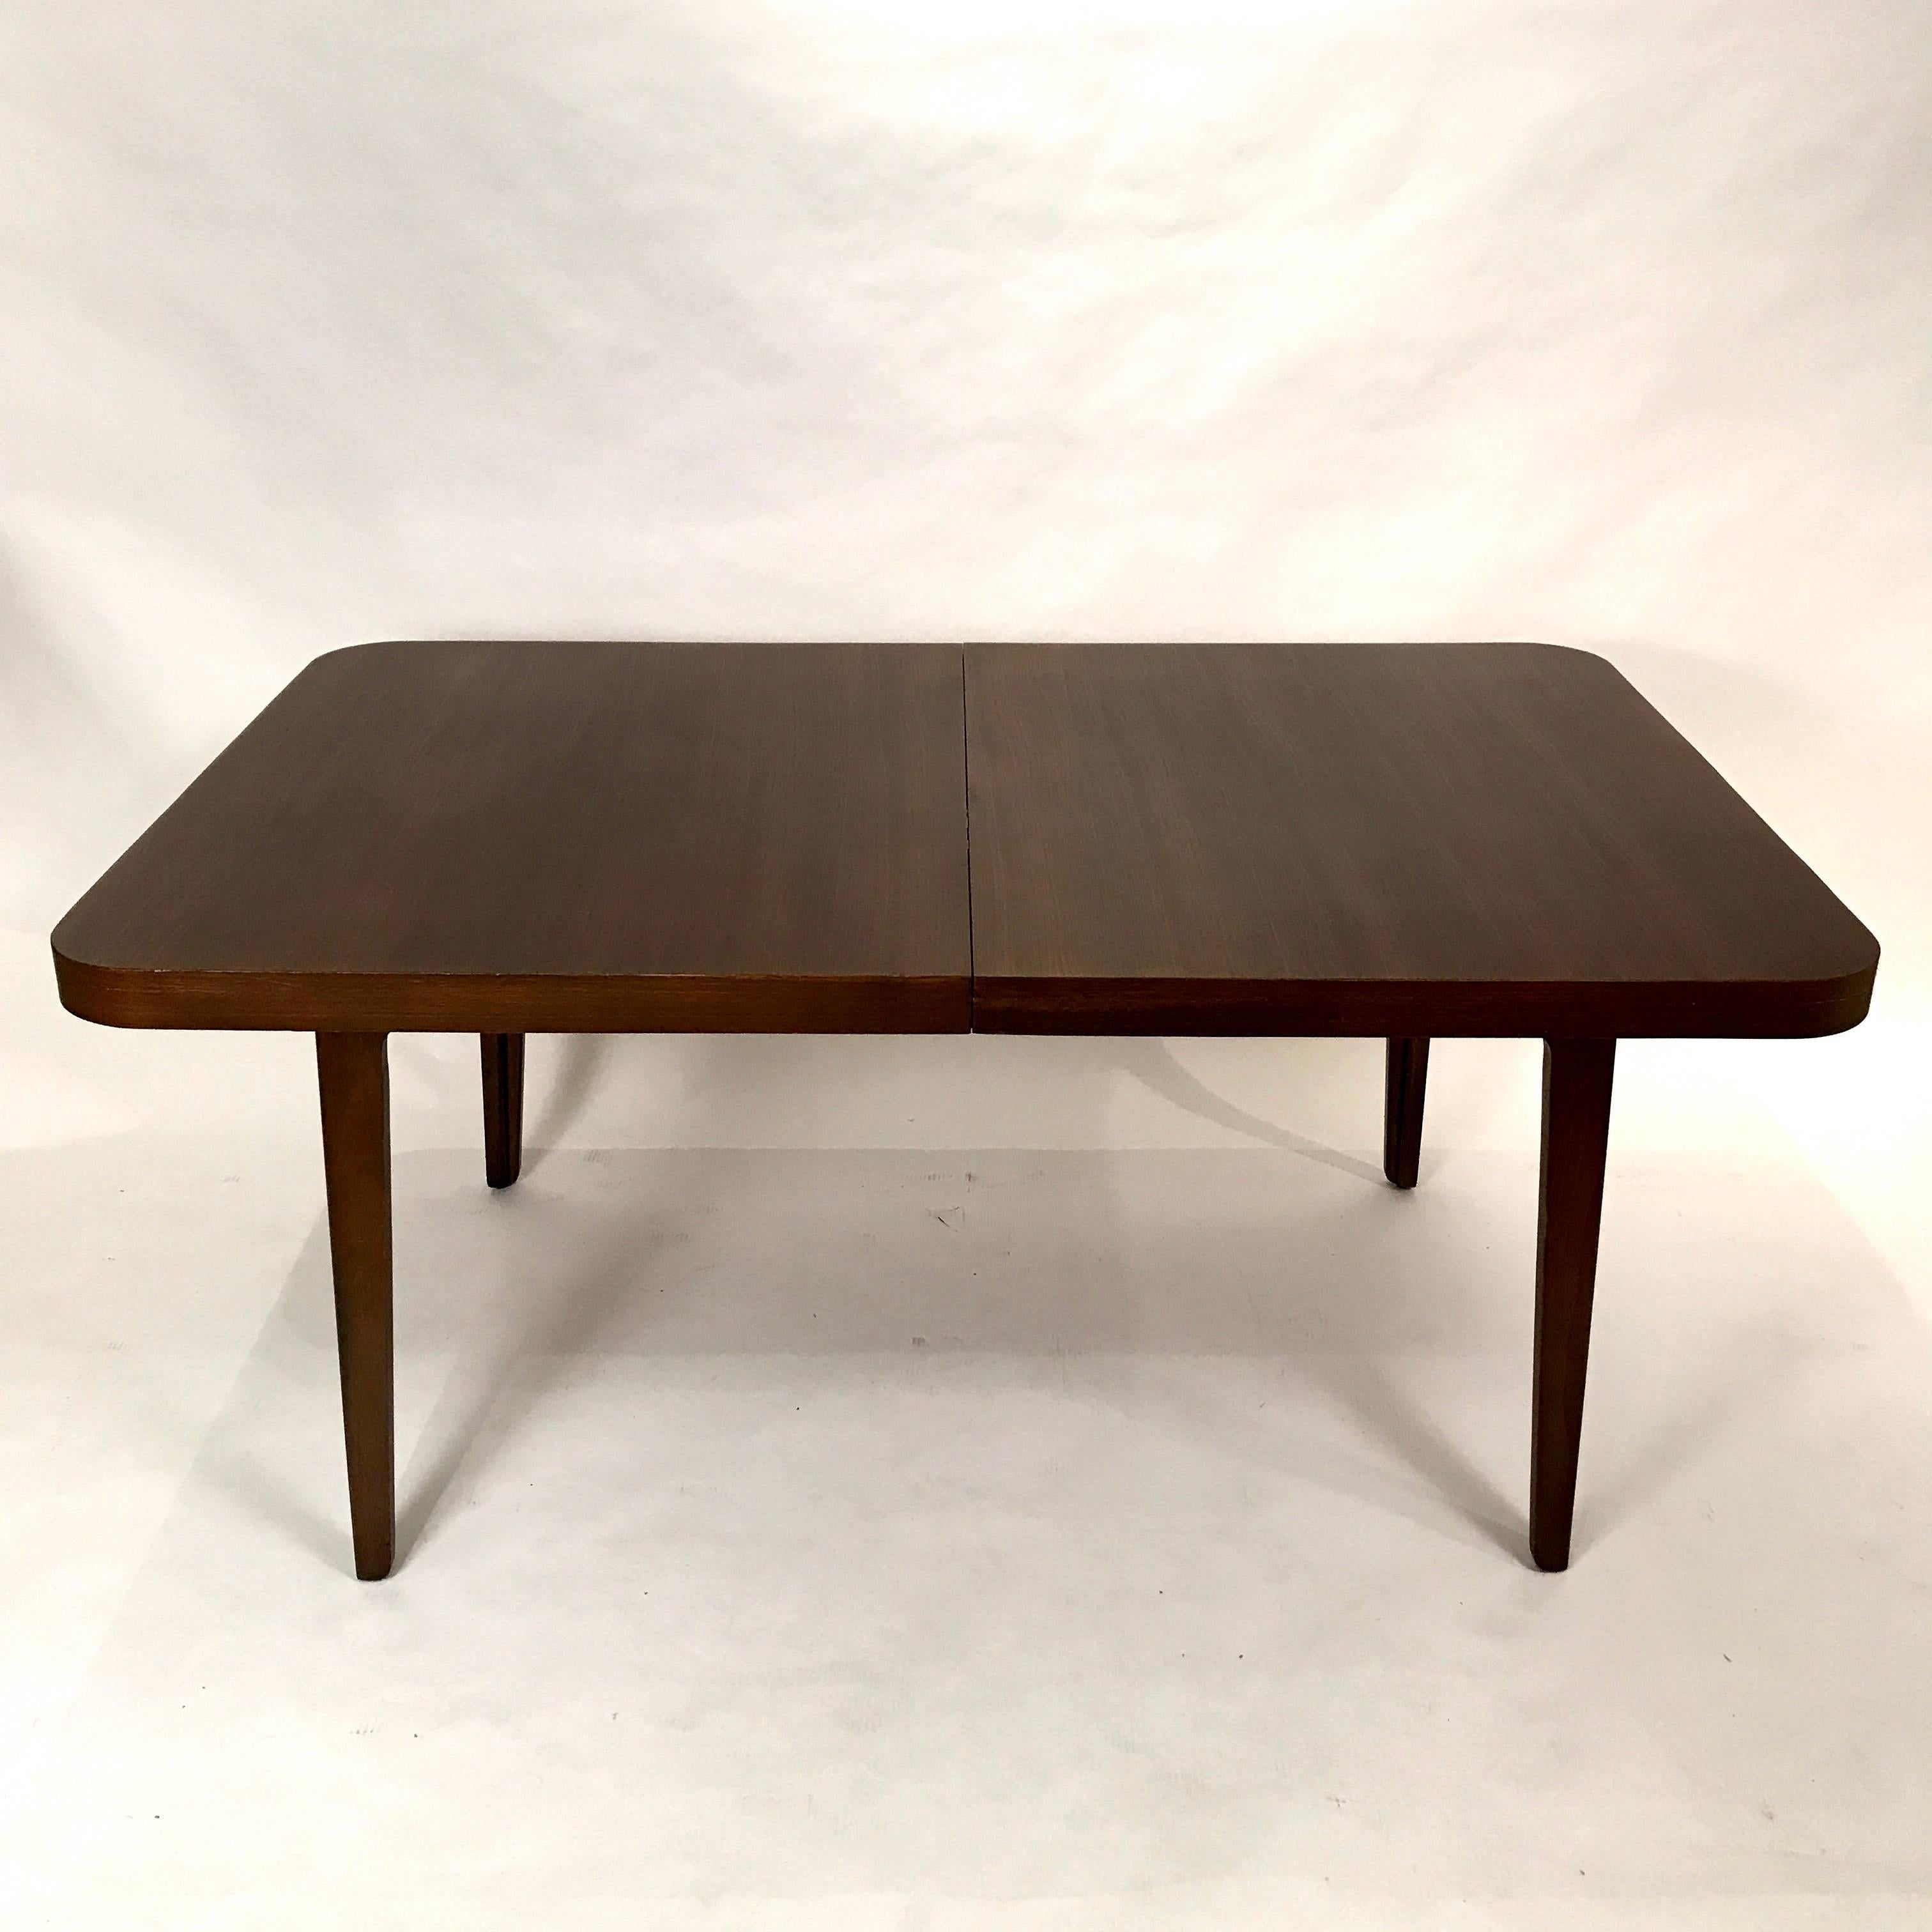 Beautiful original Edward Wormley for Drexel extension dining table. This piece retains it's original finish and is fantastic condition with two matching extension leaves. The shape is classic yet modern in design and works well with any number of